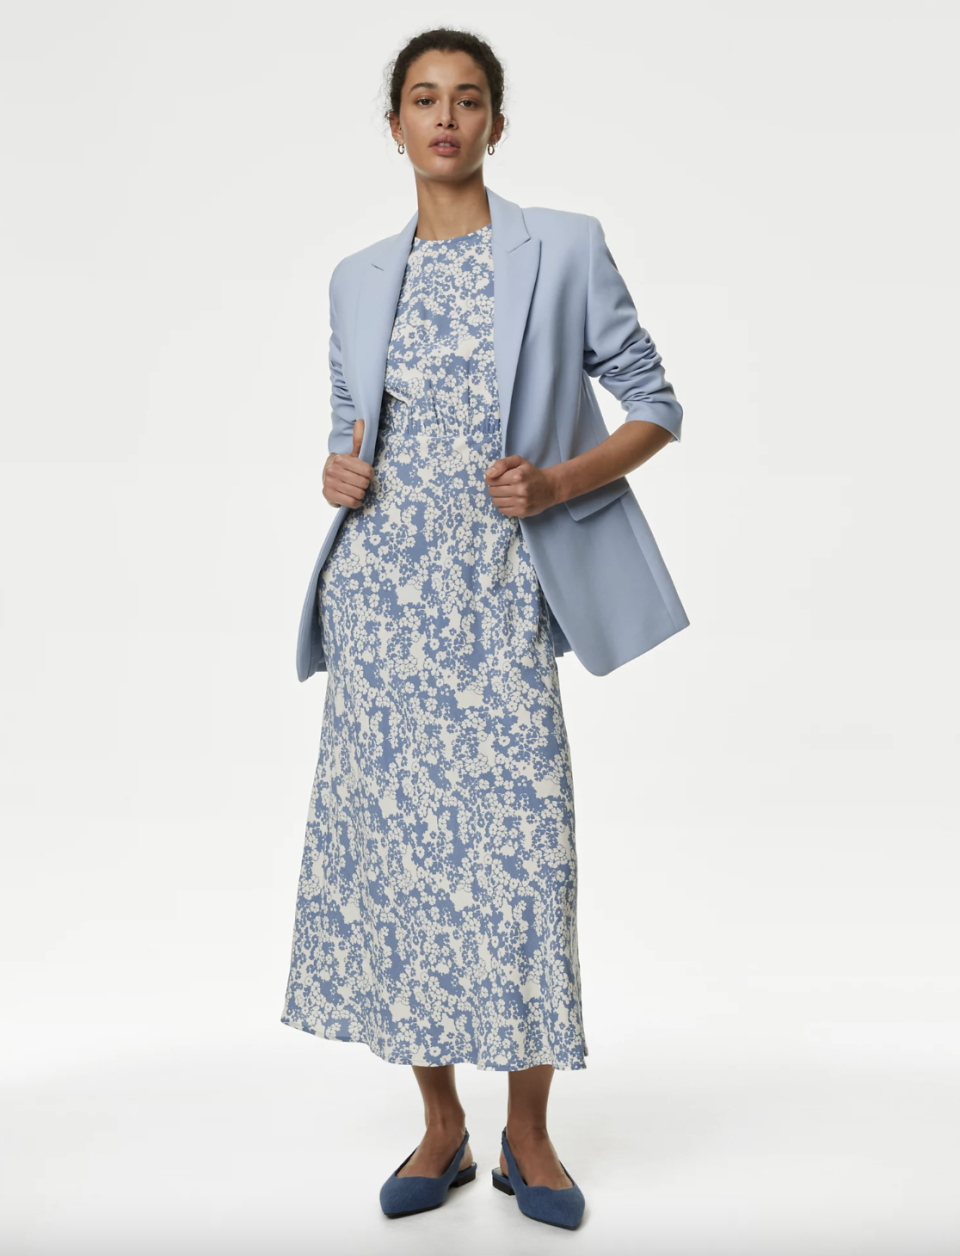 Smarten it up for weddings or the office with a tailored blazer and ballet flats. (Marks & Spencer)